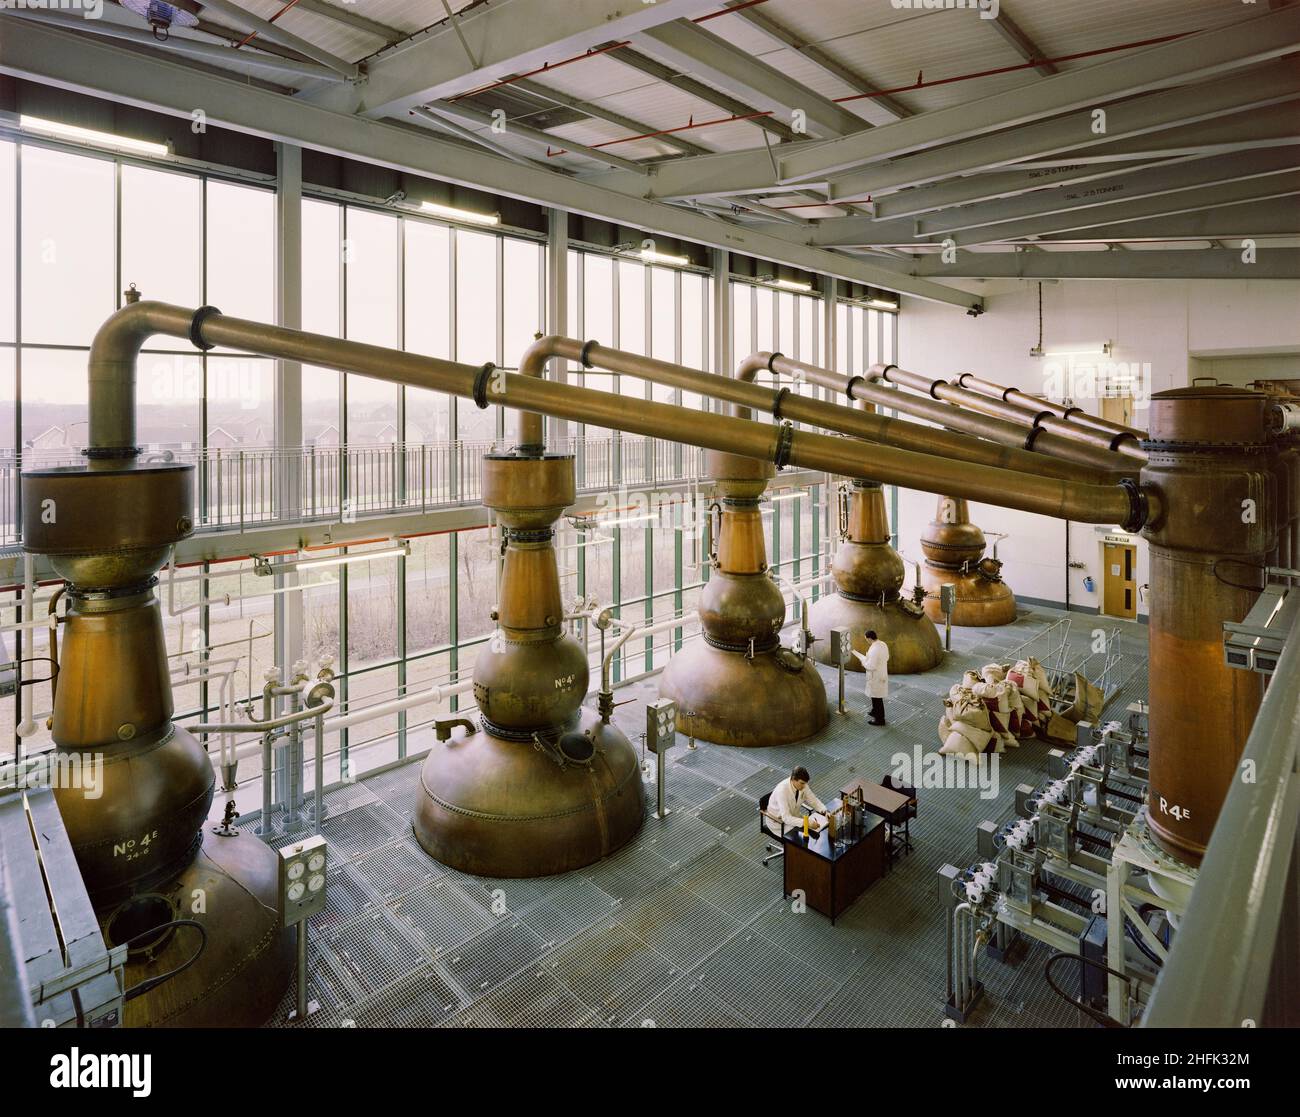 Gordon's Gin distillery, Southfields, Laindon, Basildon, Essex, 09/01/1990. A view from the first floor of the recently completed distillery for Gordon's Gin, looking towards its five copper stills and two men working on the floor below. Stock Photo